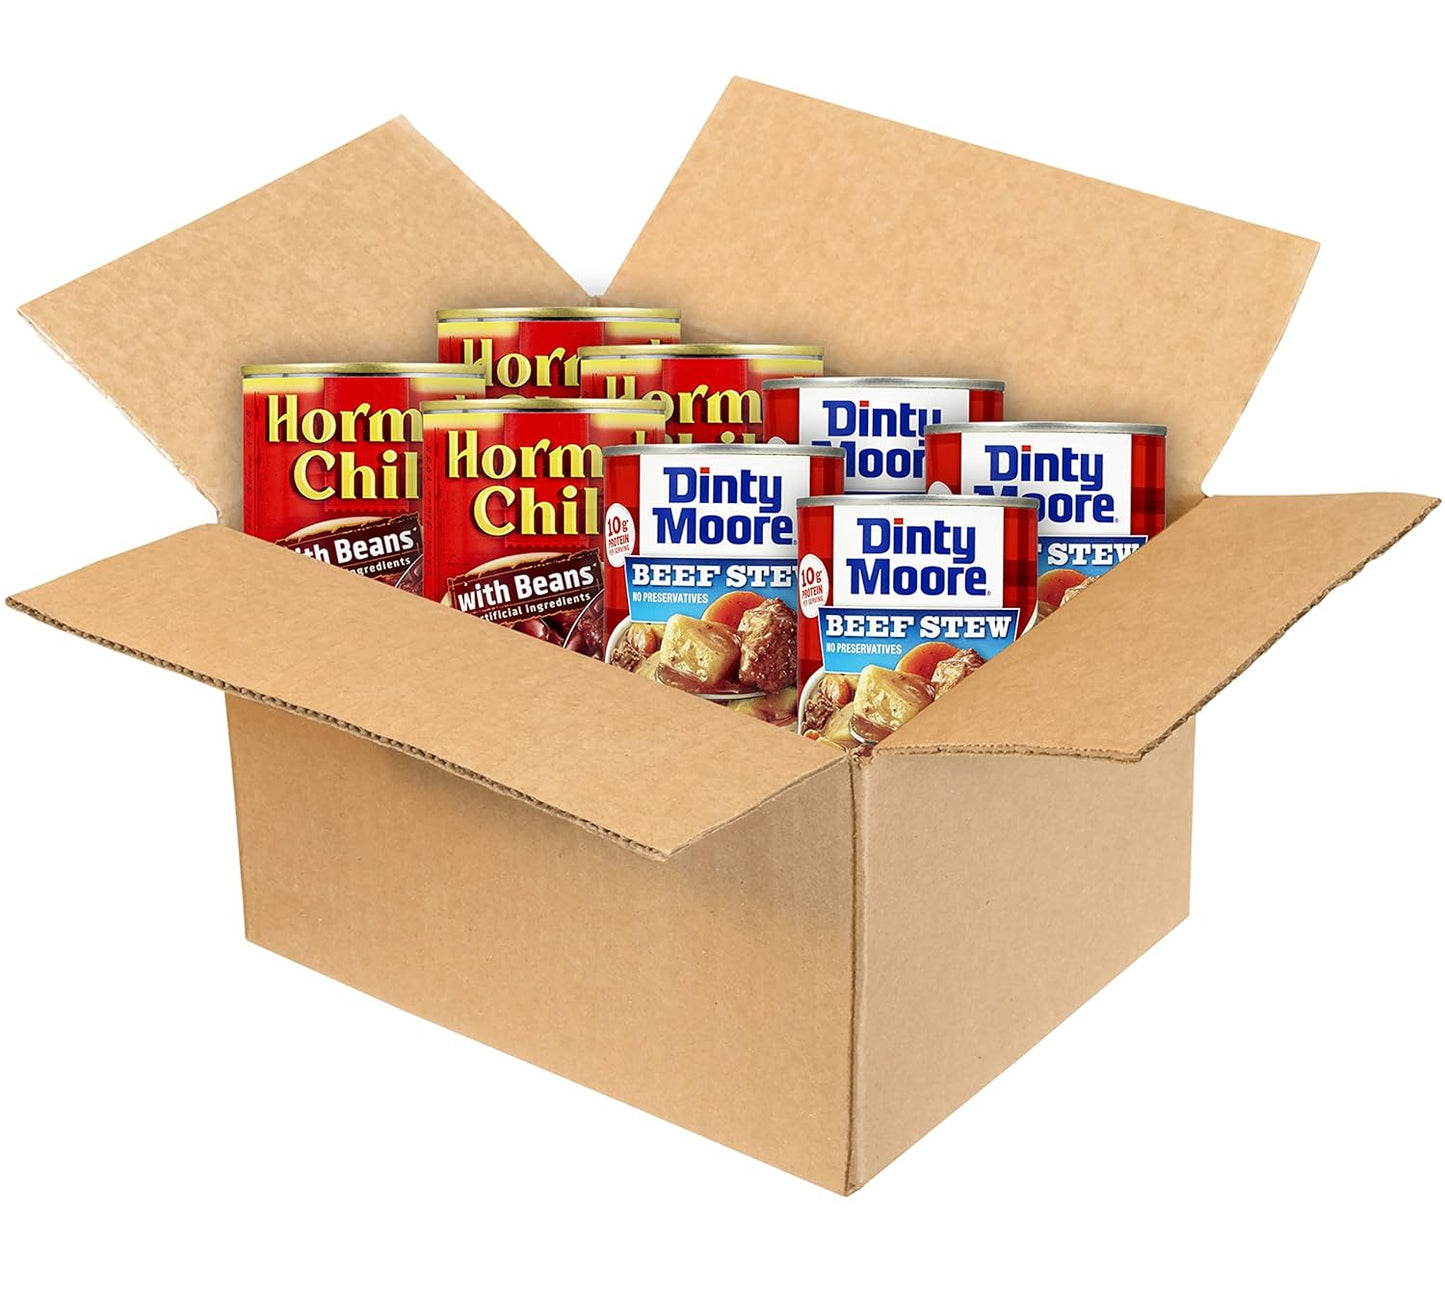 Hormel Chili With Bean & DINTY MOORE Beef Stew Variety Pack, 15 oz. cans (8-pack)